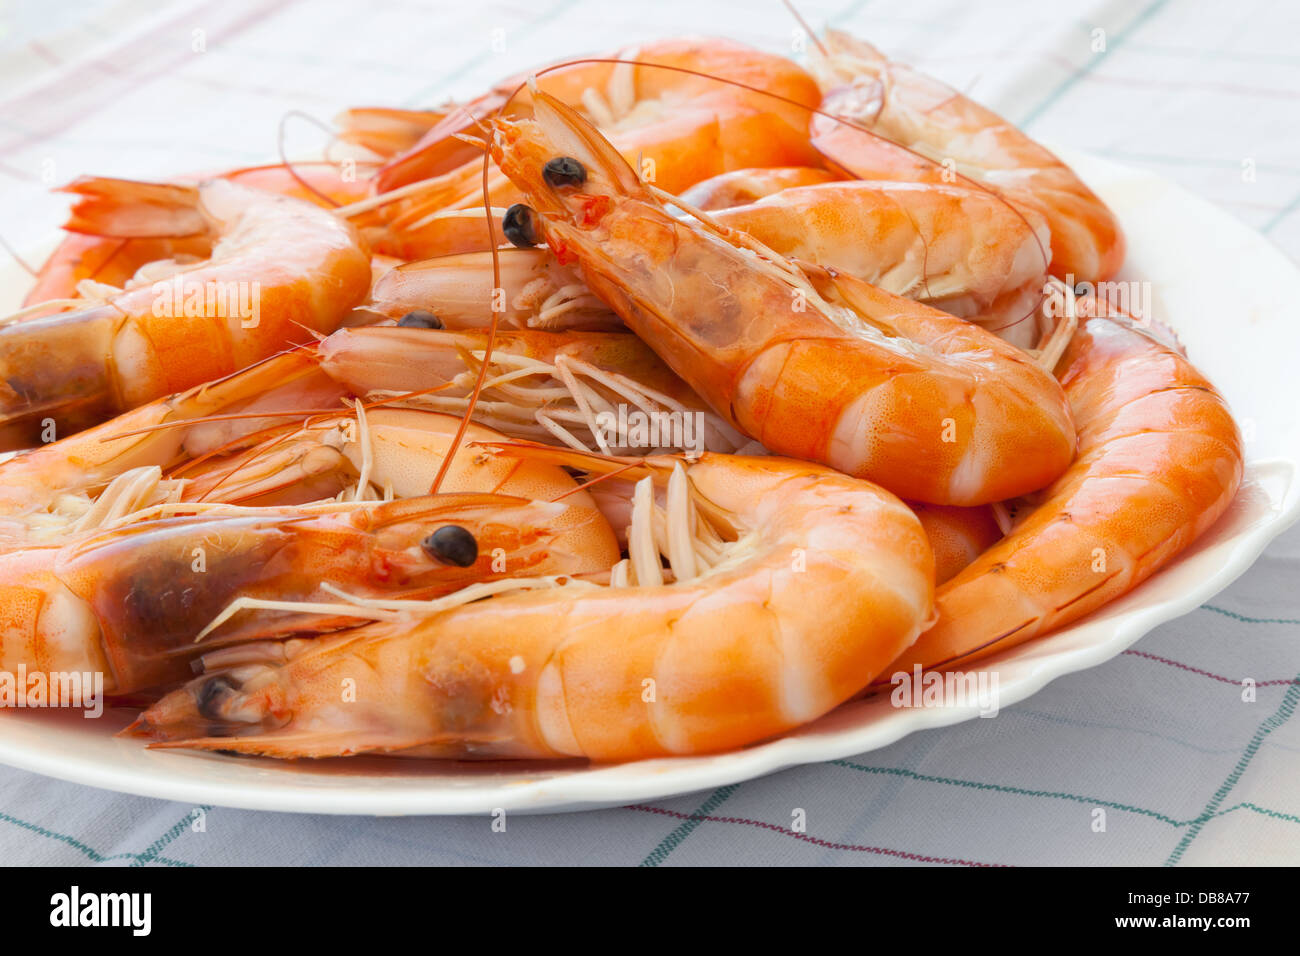 Pile of prepared shrimps on the plate Stock Photo